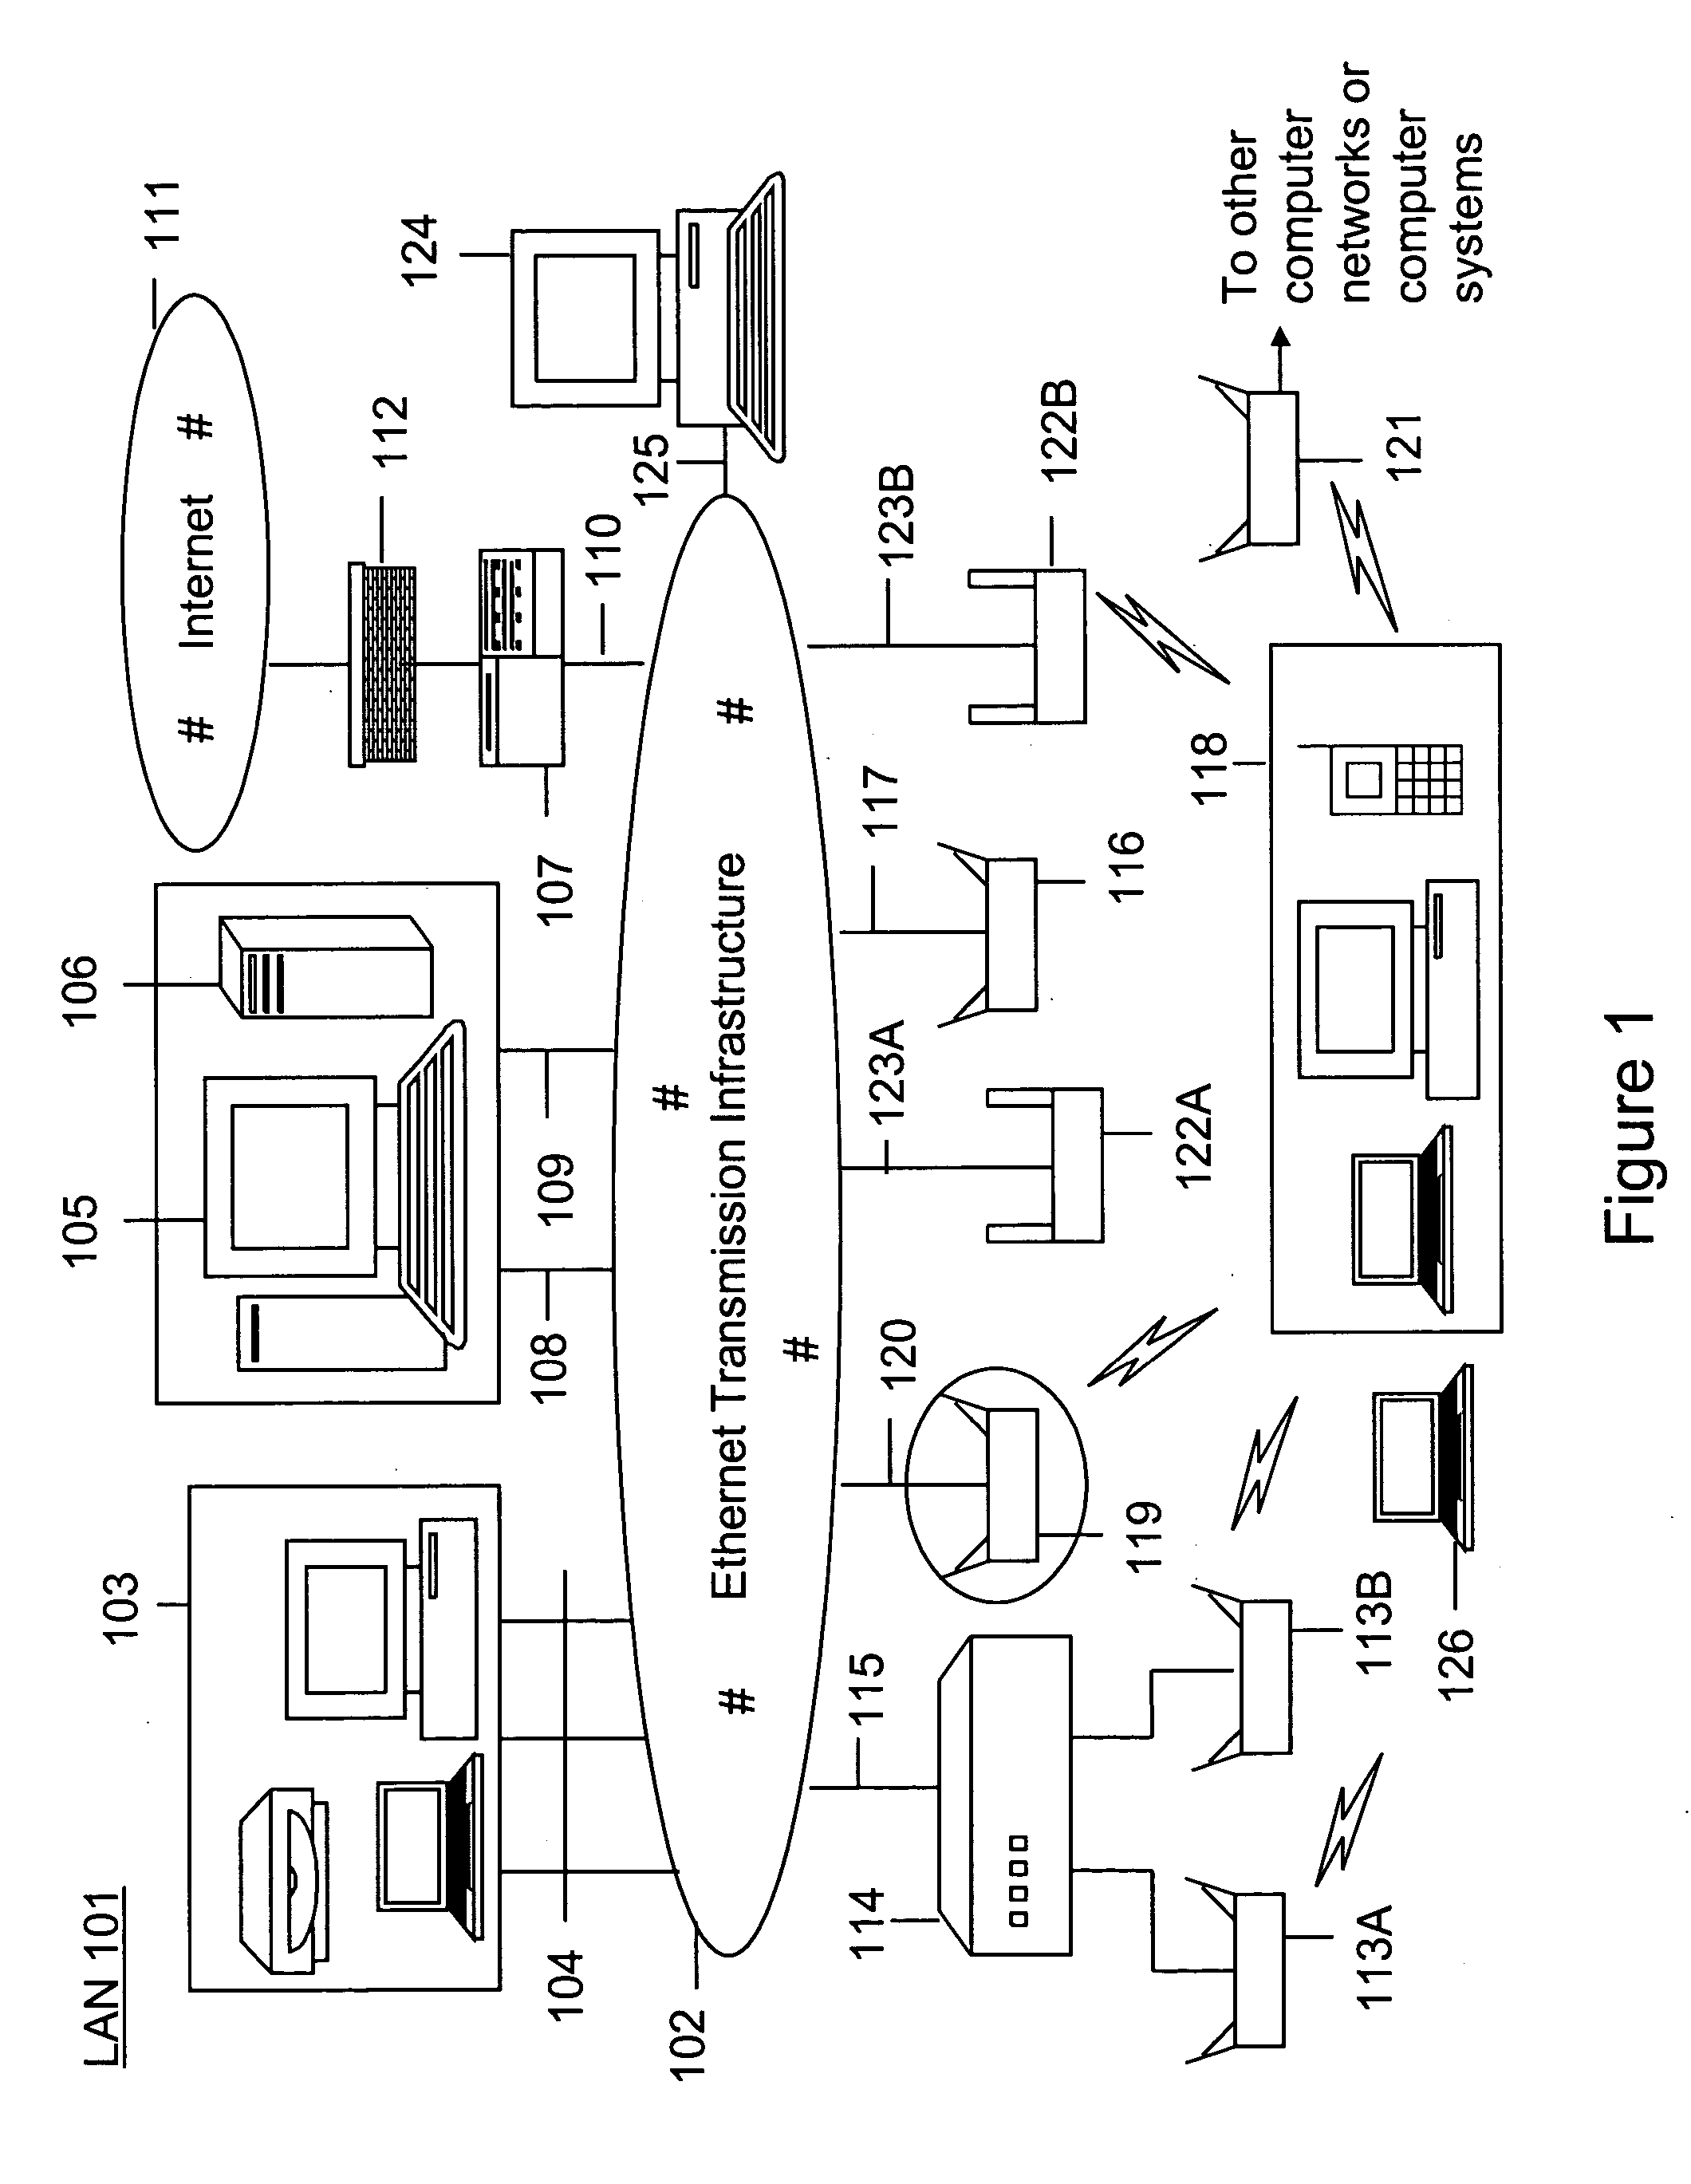 Method and system for monitoring a selected region of an airspace associated with local area networks of computing devices